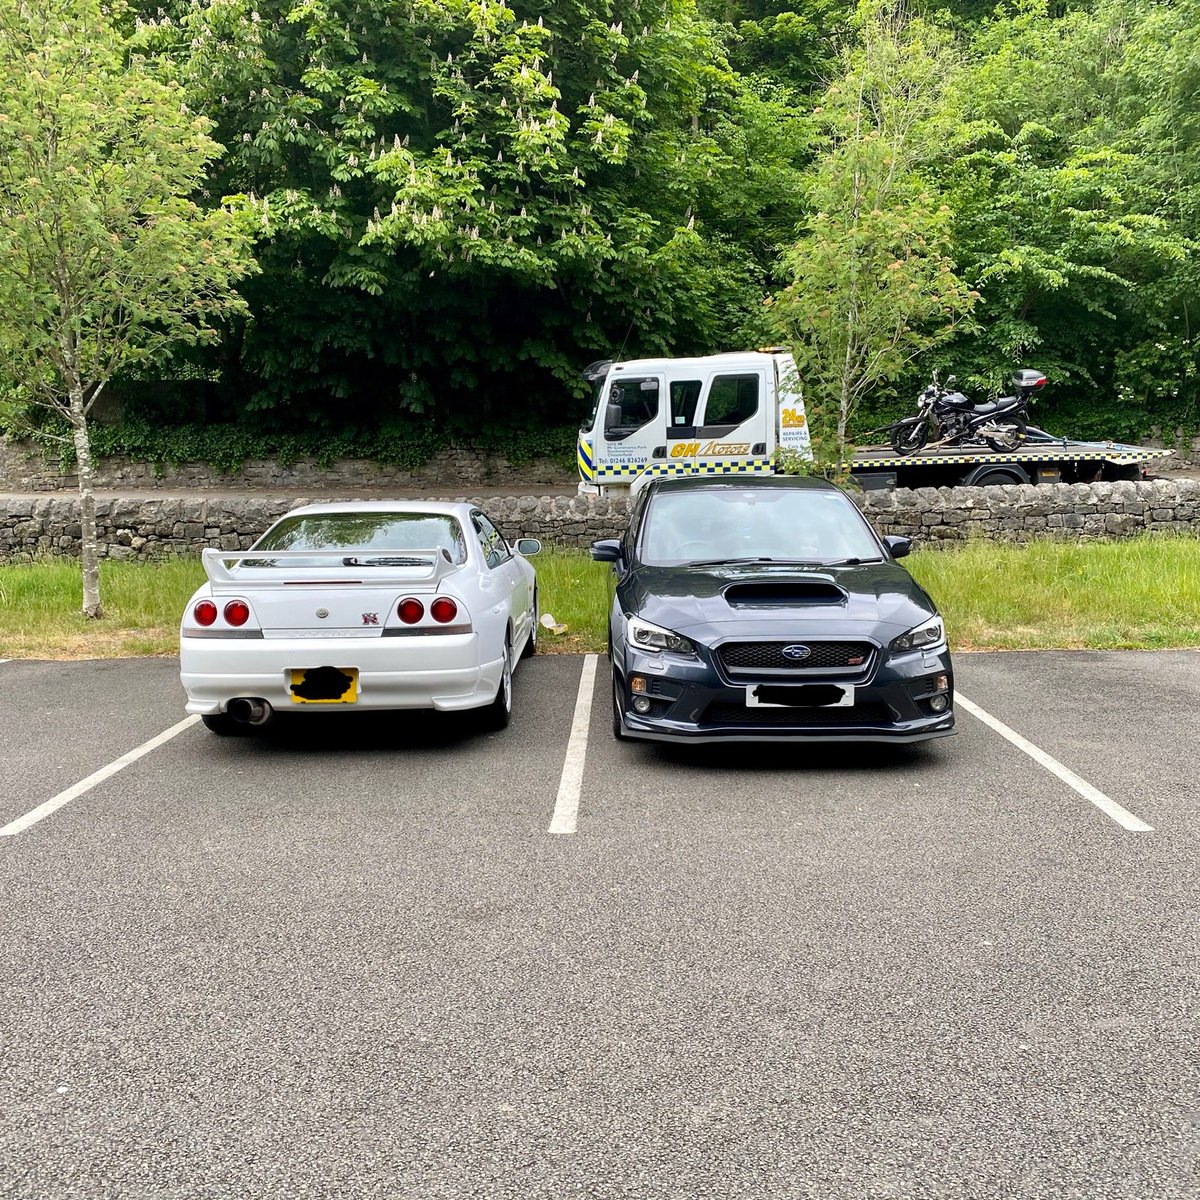 The old his and hers. Loved my GTR 😍